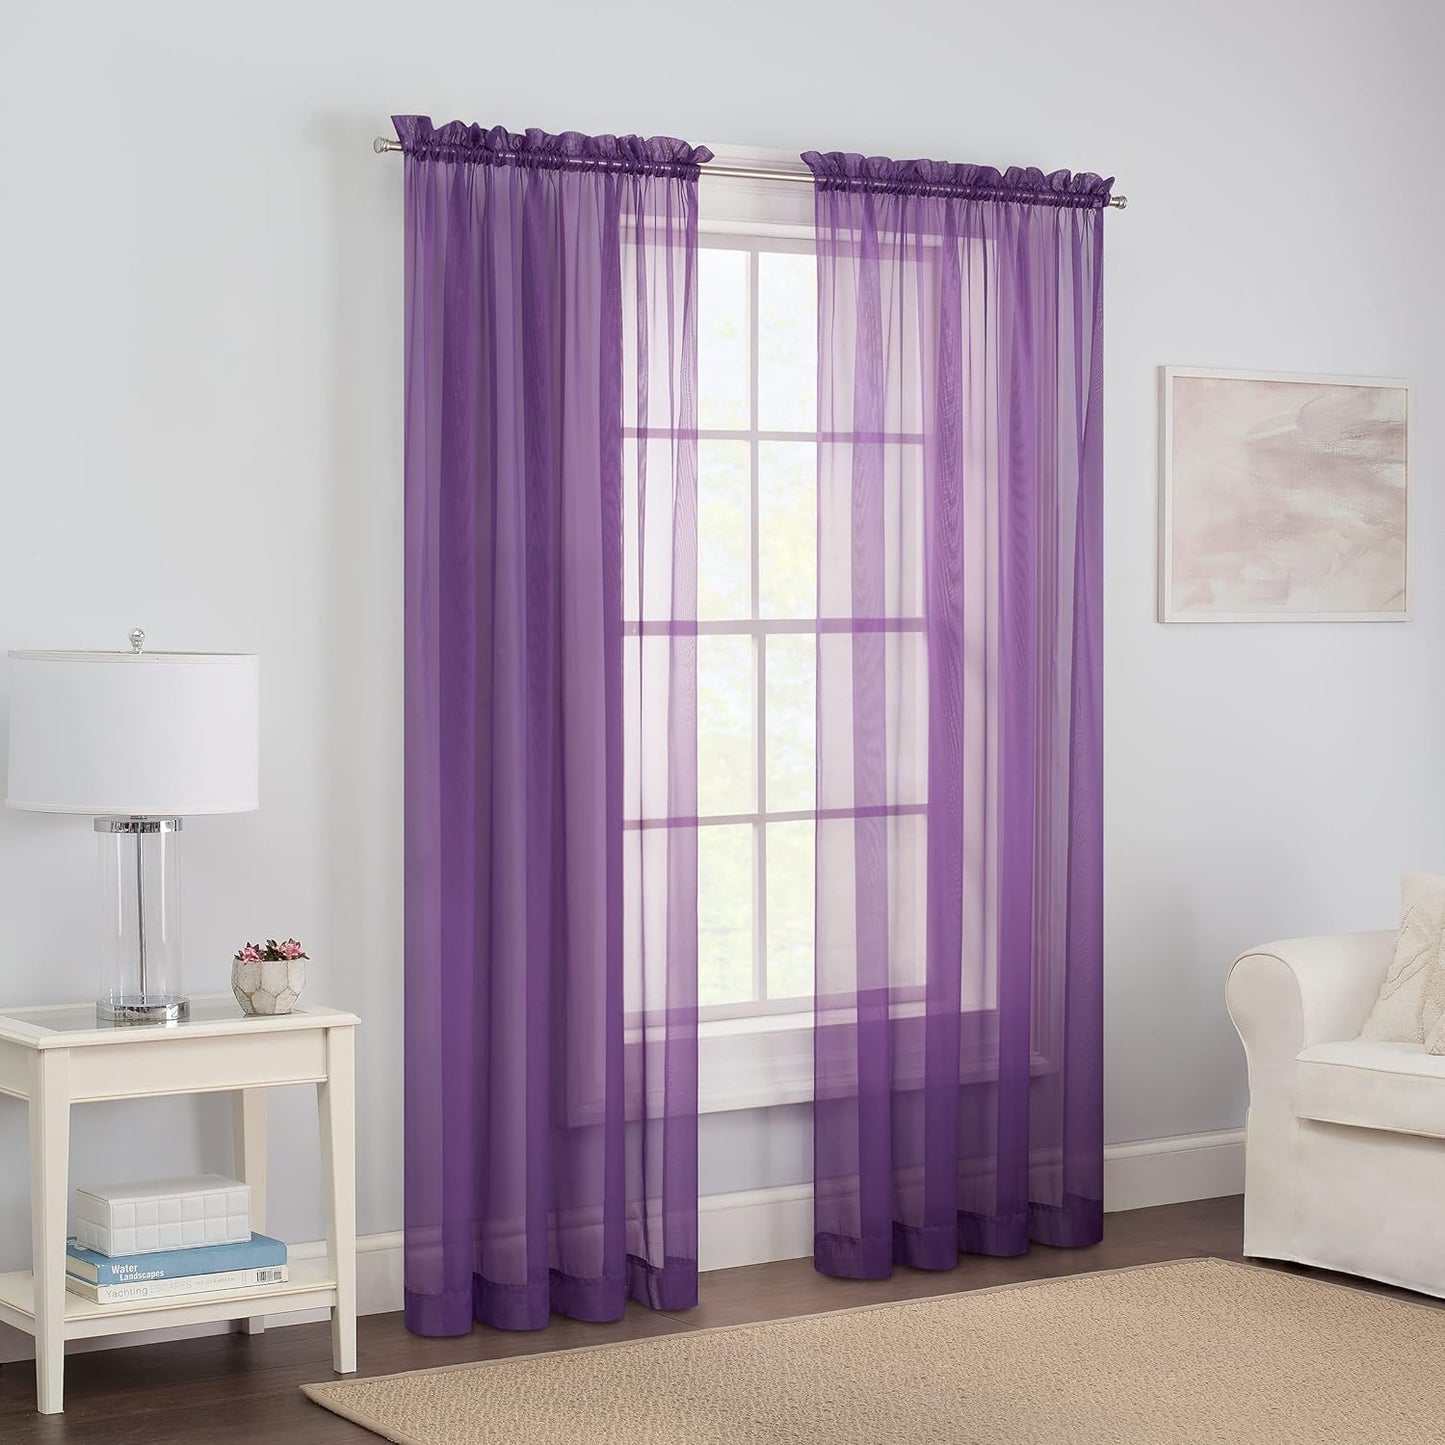 Pairs to Go Victoria Voile Modern Sheer Rod Pocket Window Curtains for Living Room (2 Panels), 59 in X 84 In, Taupe  Ellery Homestyles Purple Curtains 59 In X 84 In